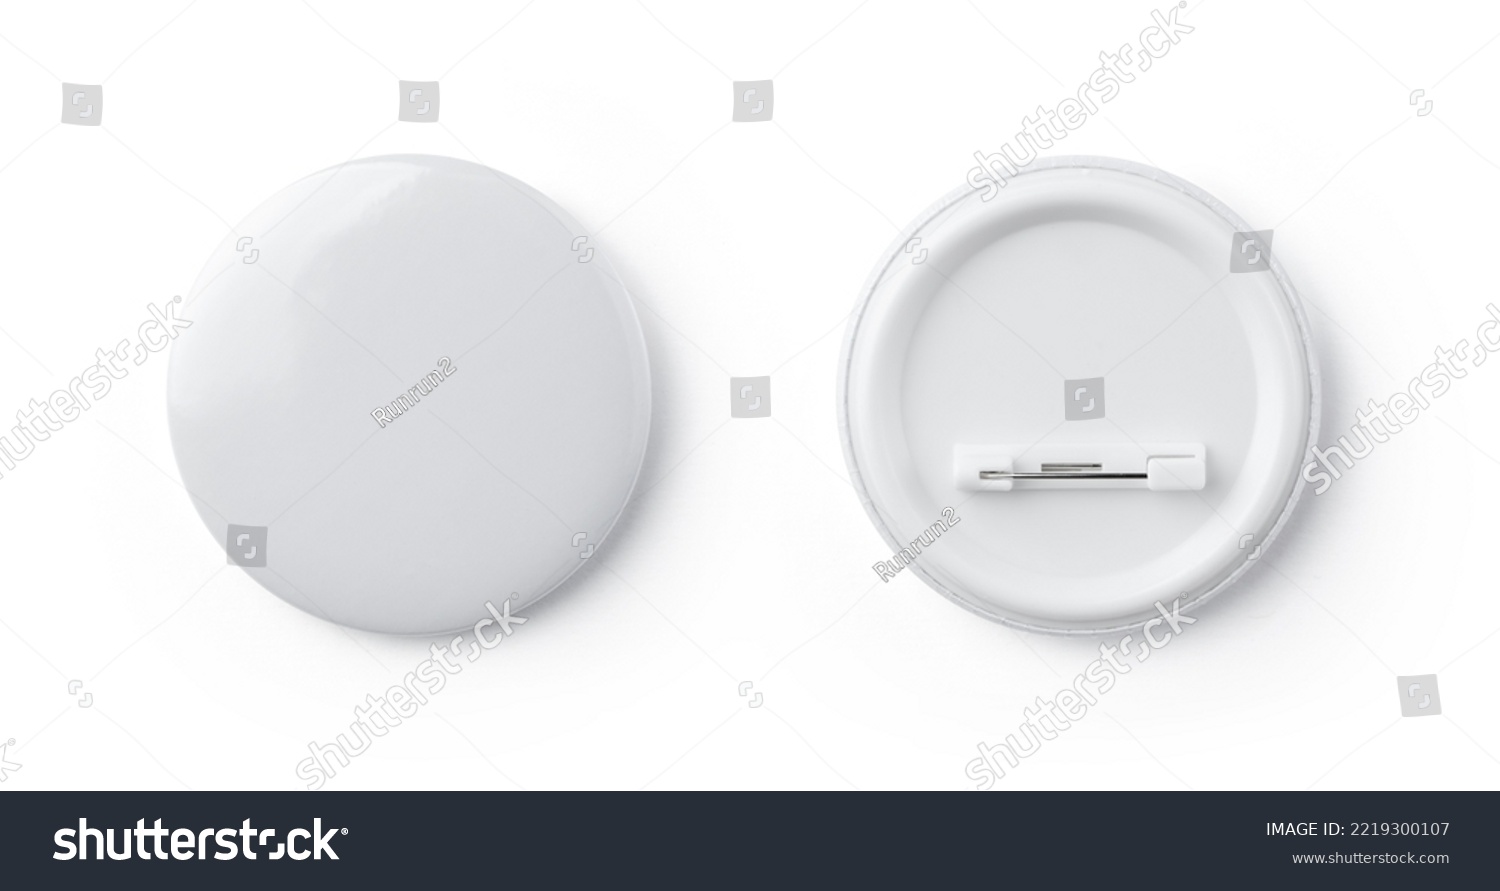 White blank badge. Glossy round button. Pin badge mockup isolated on white background #2219300107